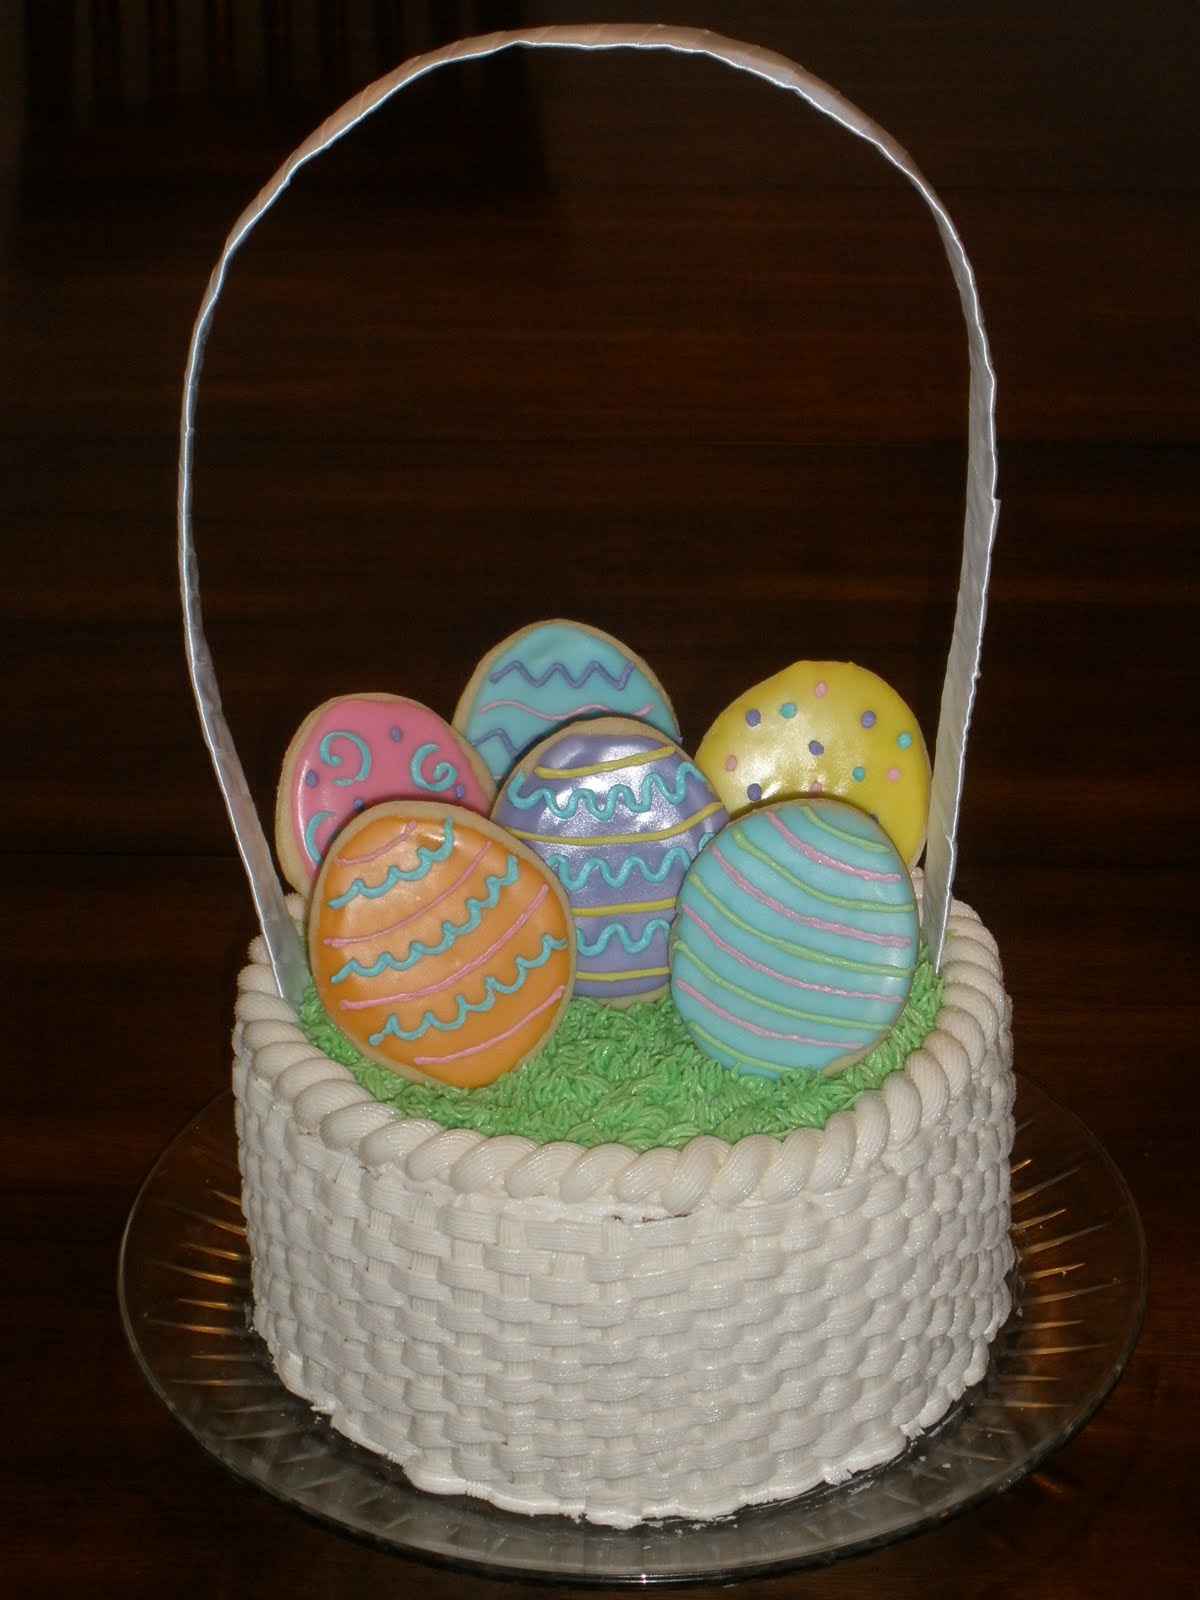 It's a piece of cake: Easter Basket Cake